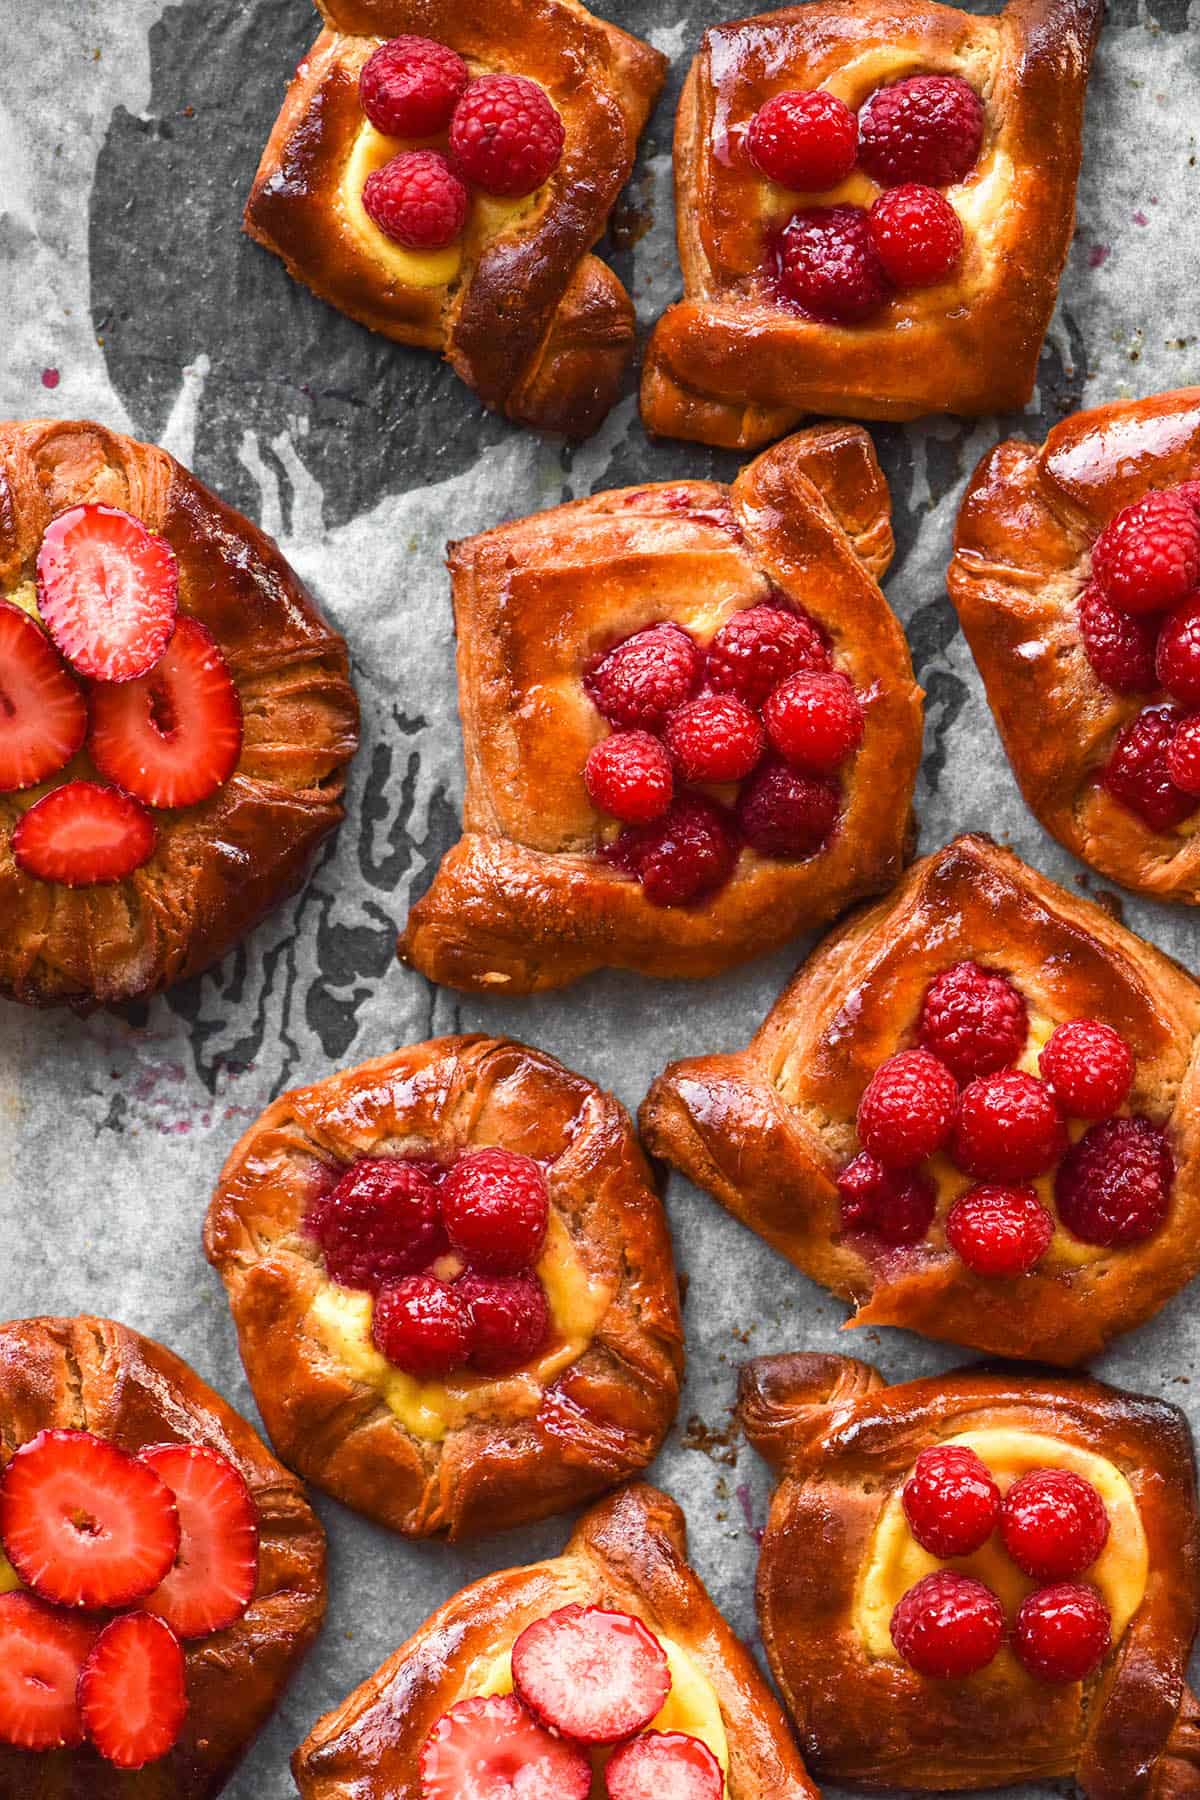 An aerial image of gluten free fruit pastries on a lined baking sheet. The pastries are filled with custard and strawberries and the outer pastry is golden brown